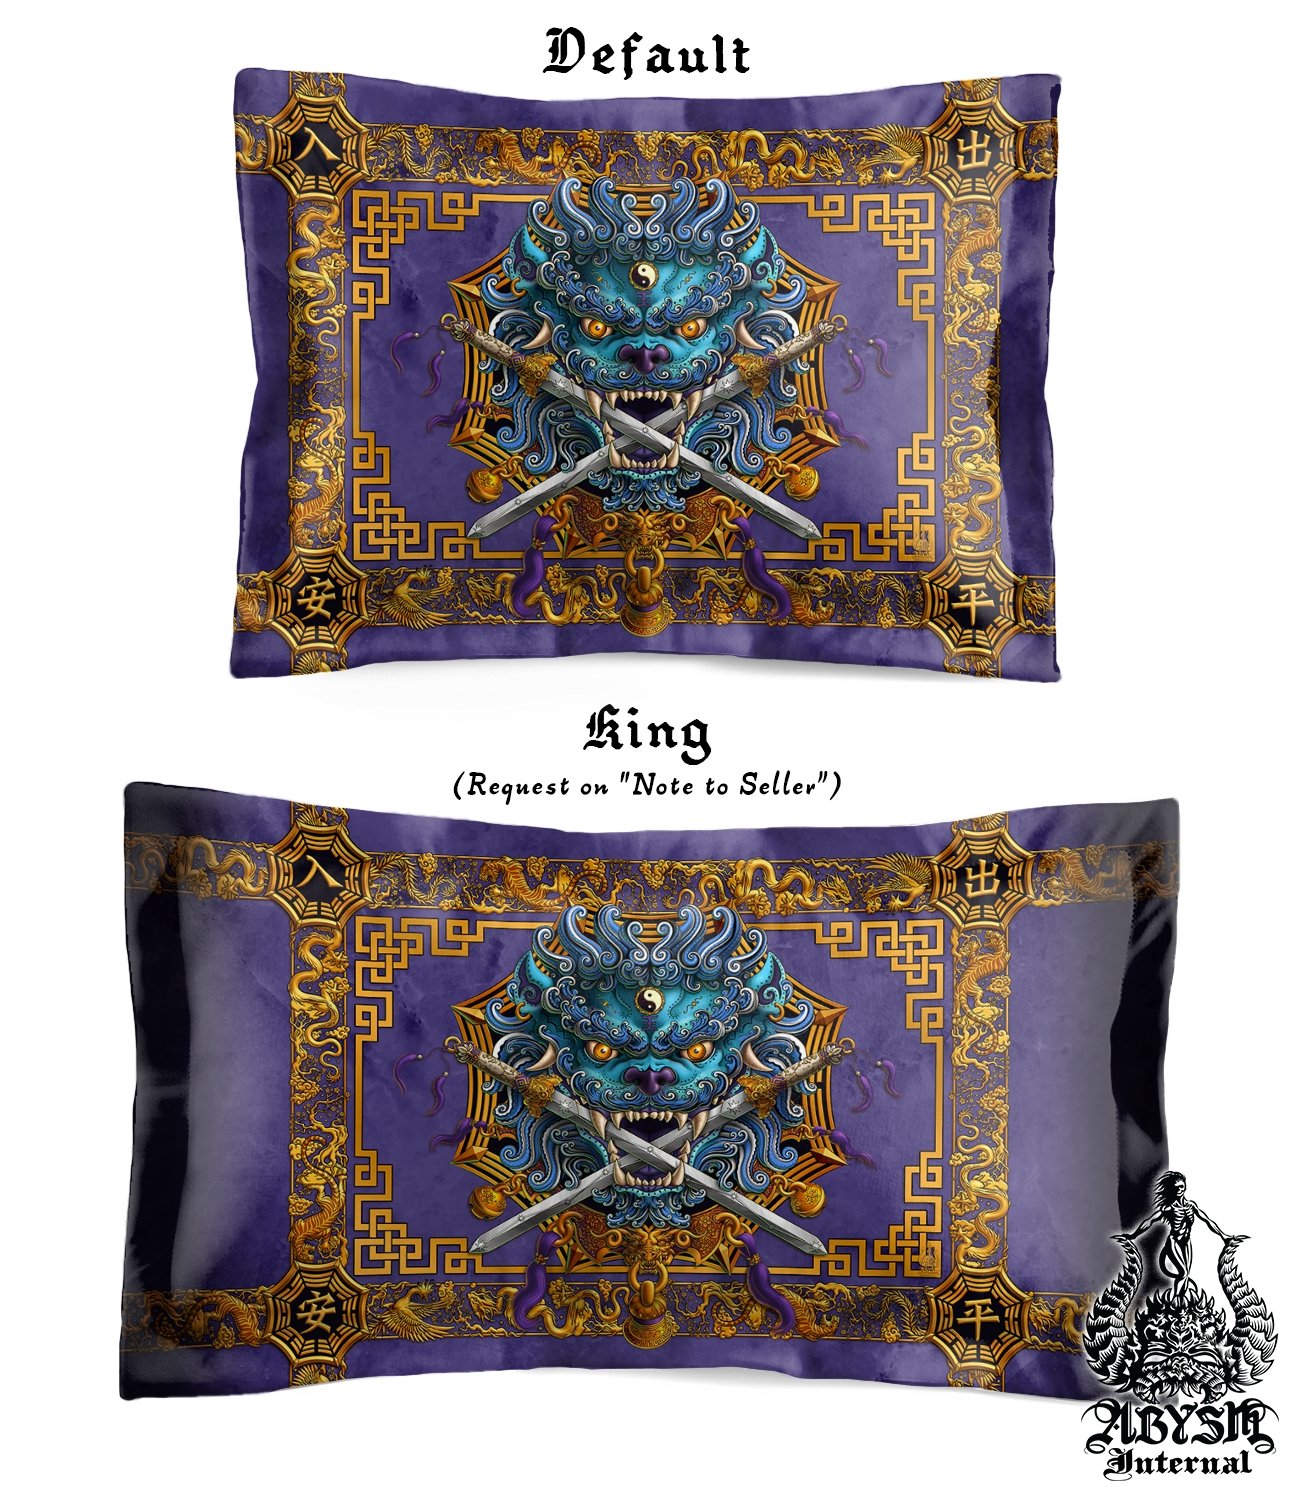 Asian Lion Bedding Set, Comforter and Duvet, Taiwan Sword Lion, Chinese Bed Cover, Gamer Bedroom, Indie Decor, King, Queen and Twin Size - Traditional Blue - Abysm Internal